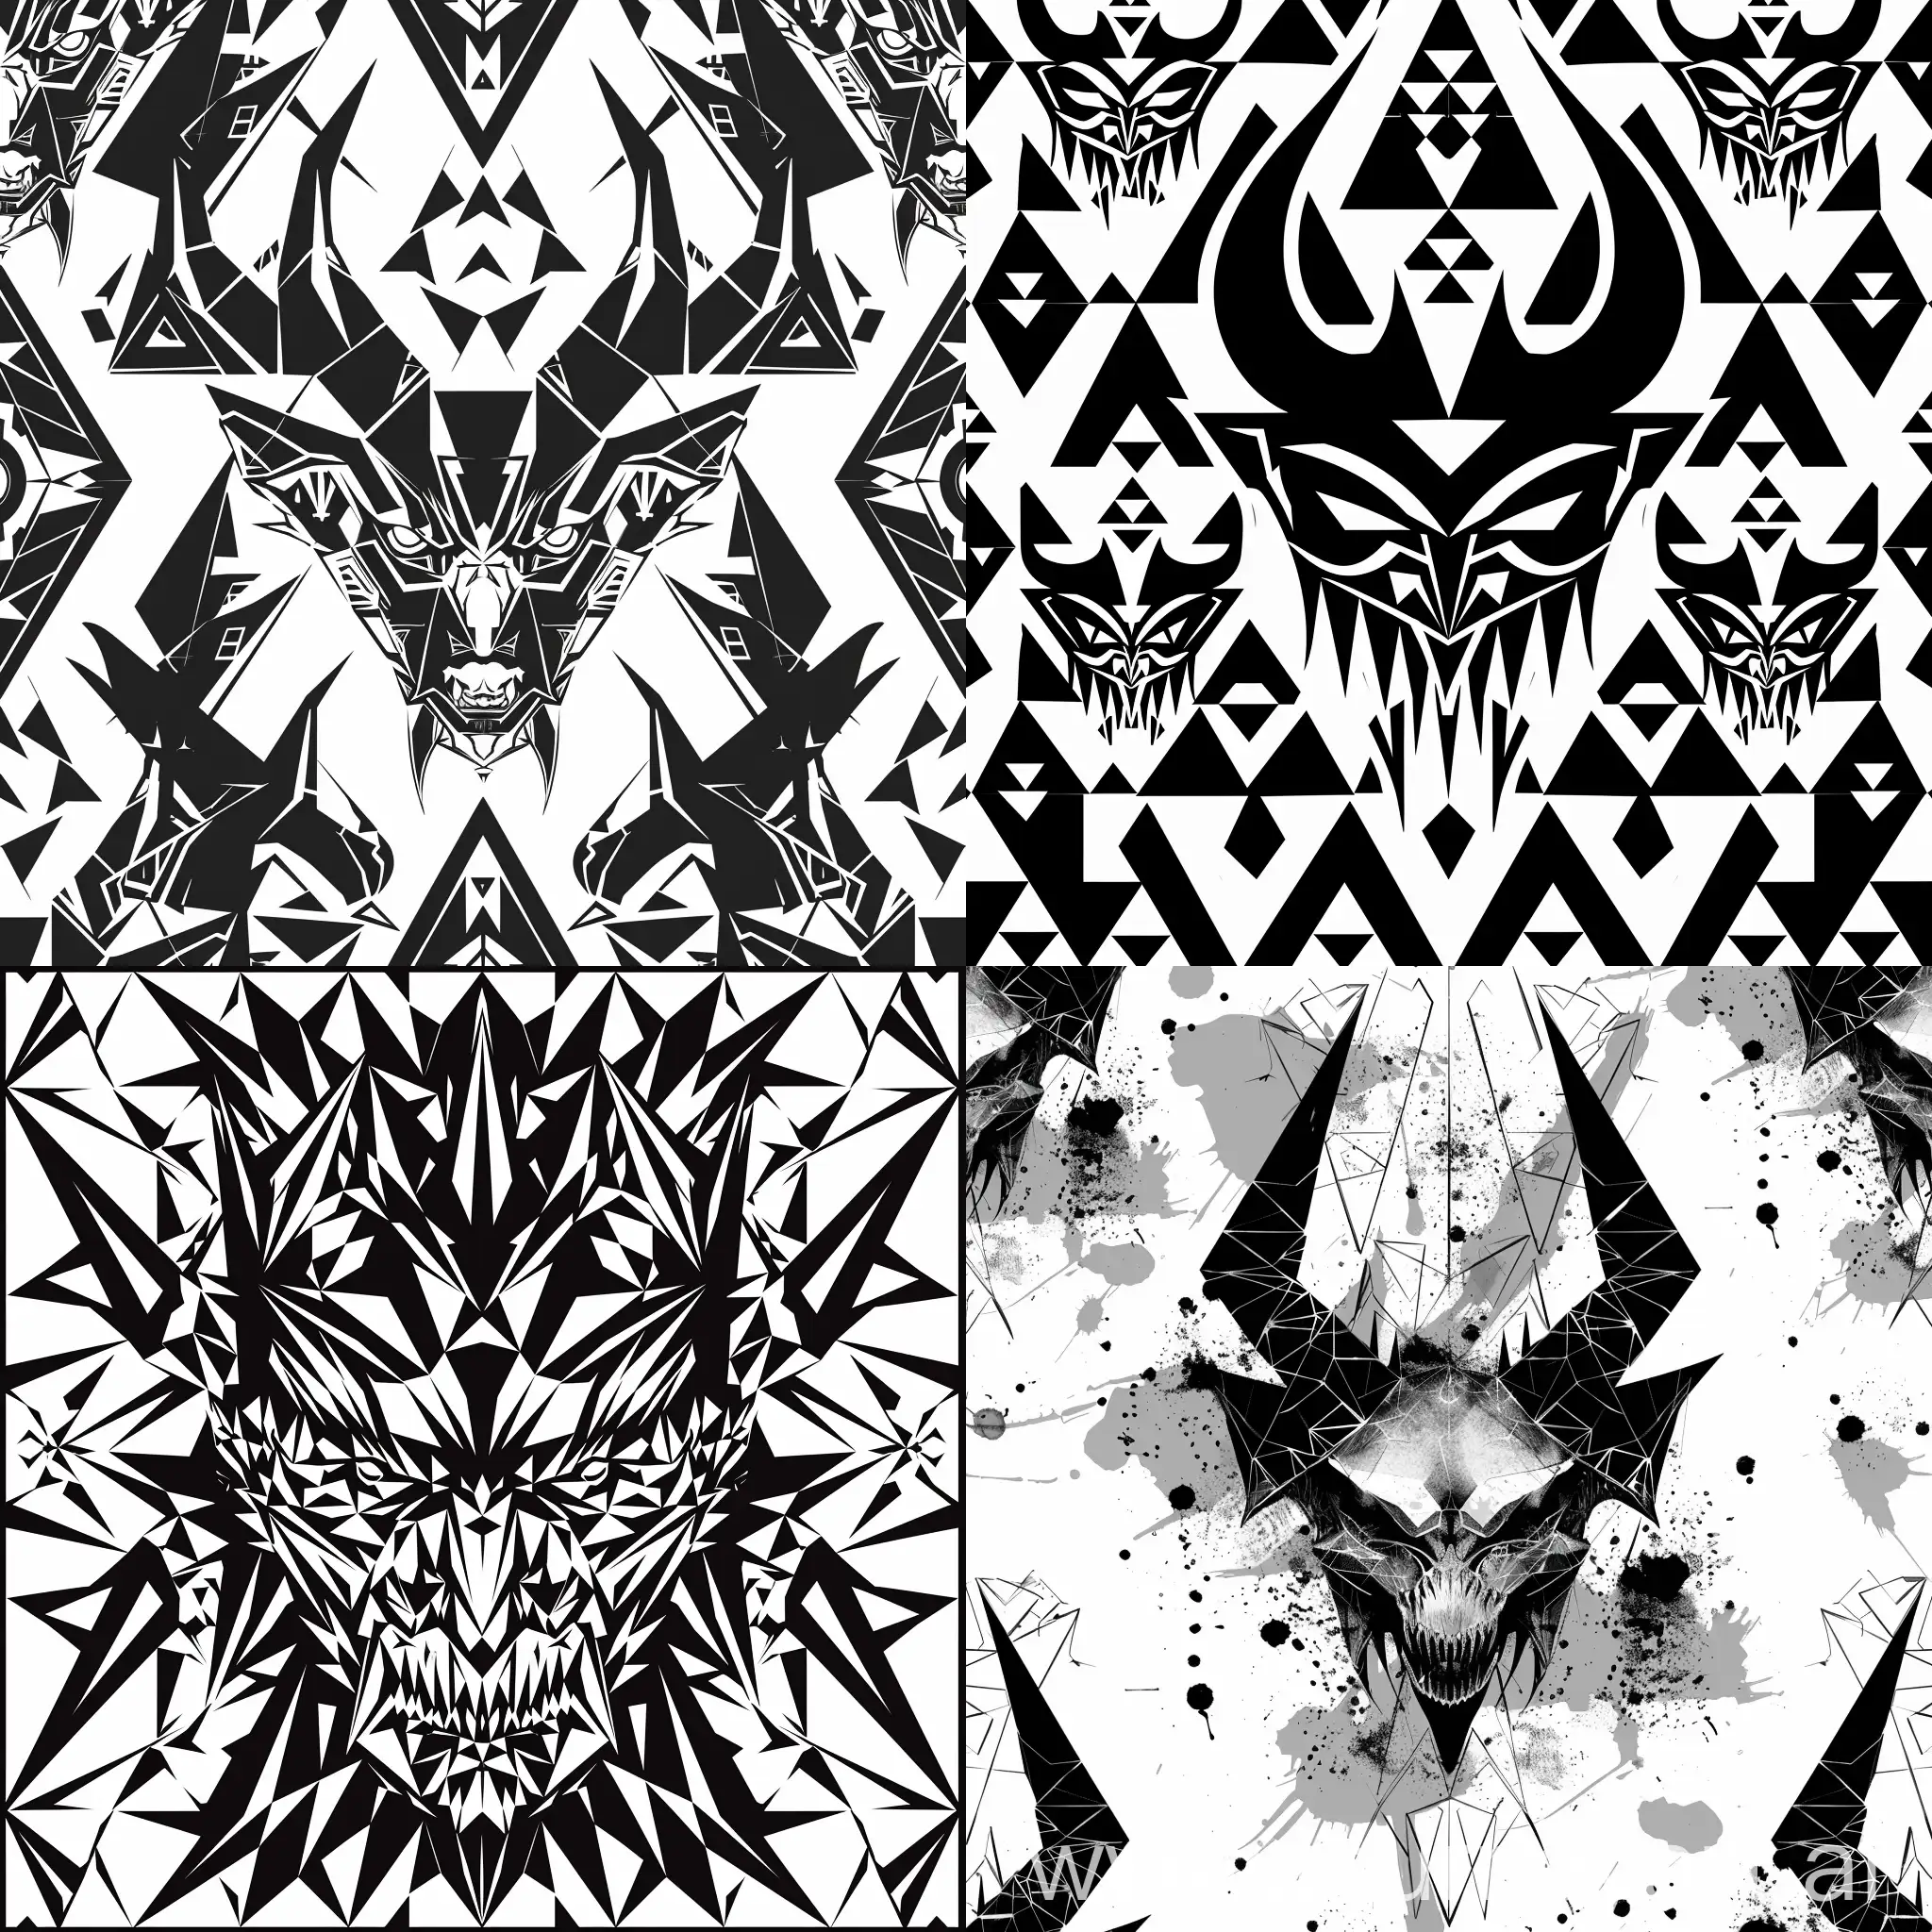 Abstract-Geometric-Devil-Pattern-in-Striking-Black-and-White-Vector-Art